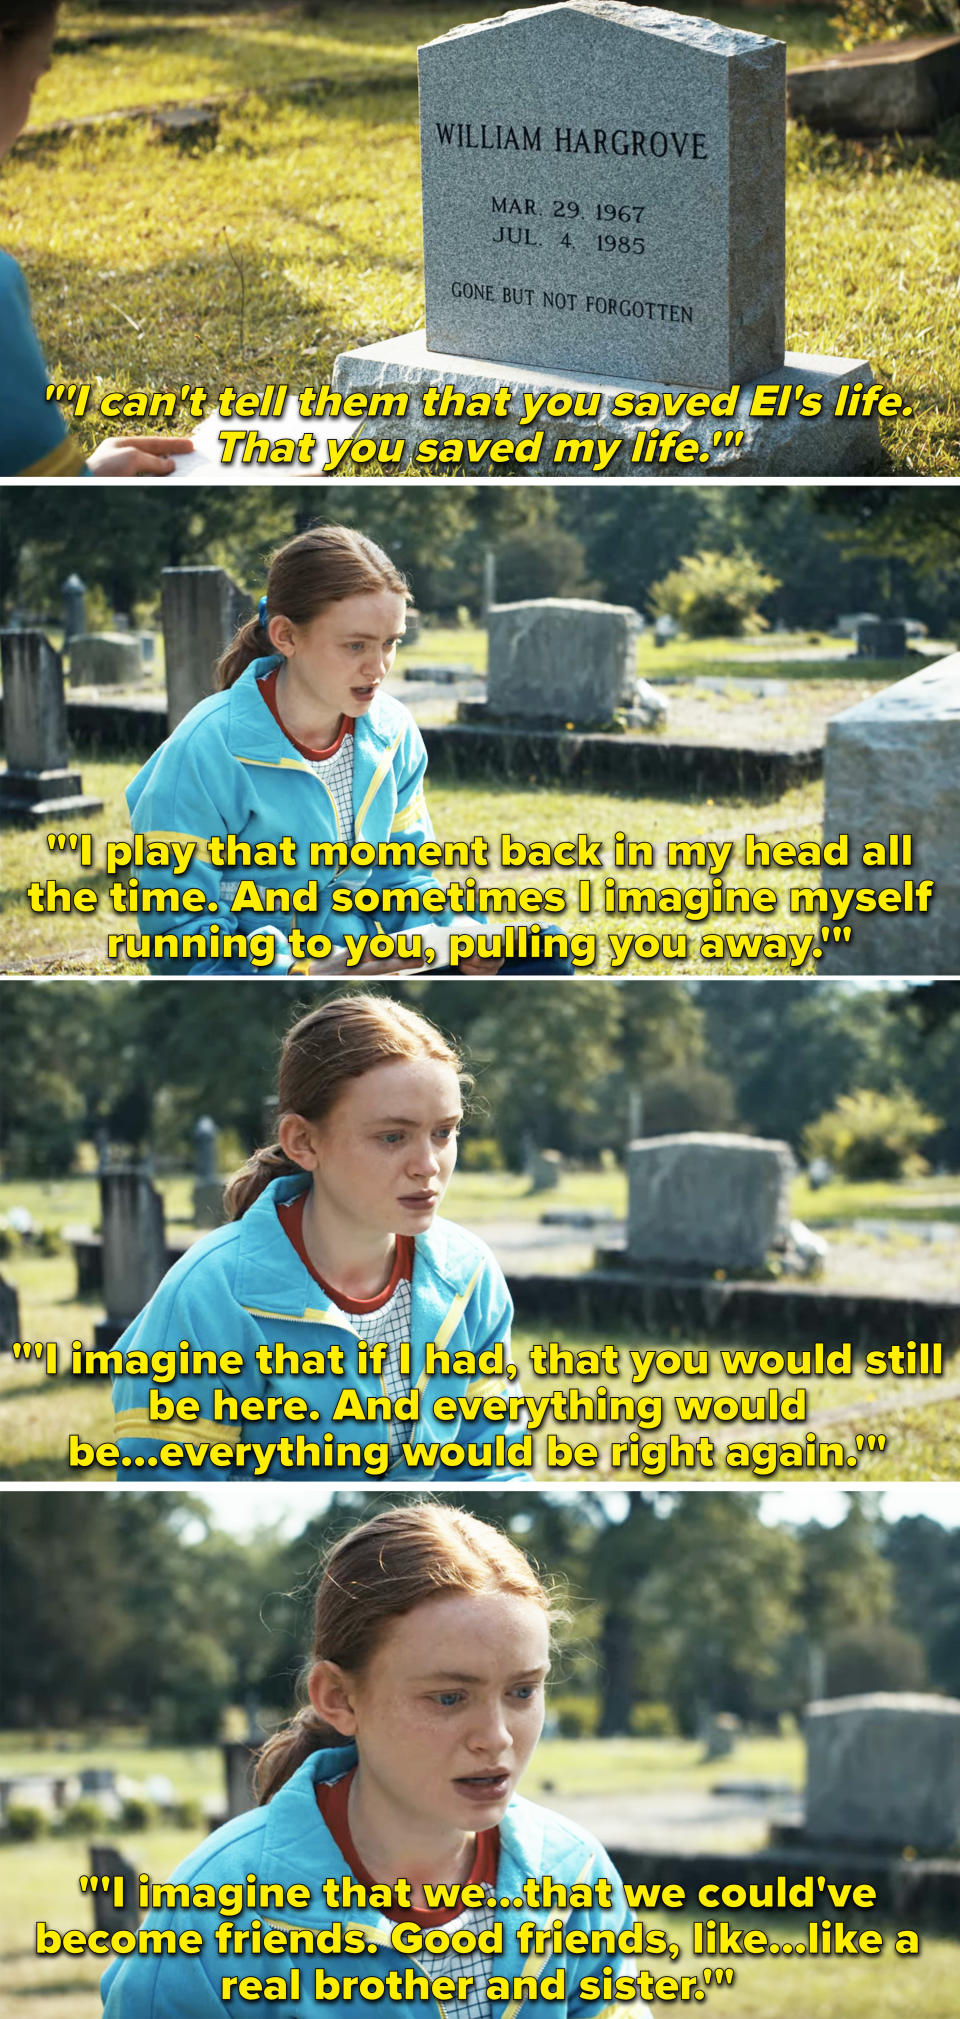 Max giving a speech at her brother's grave, saying she imagines herself saving his life and them becoming friends, like a real brother and sister